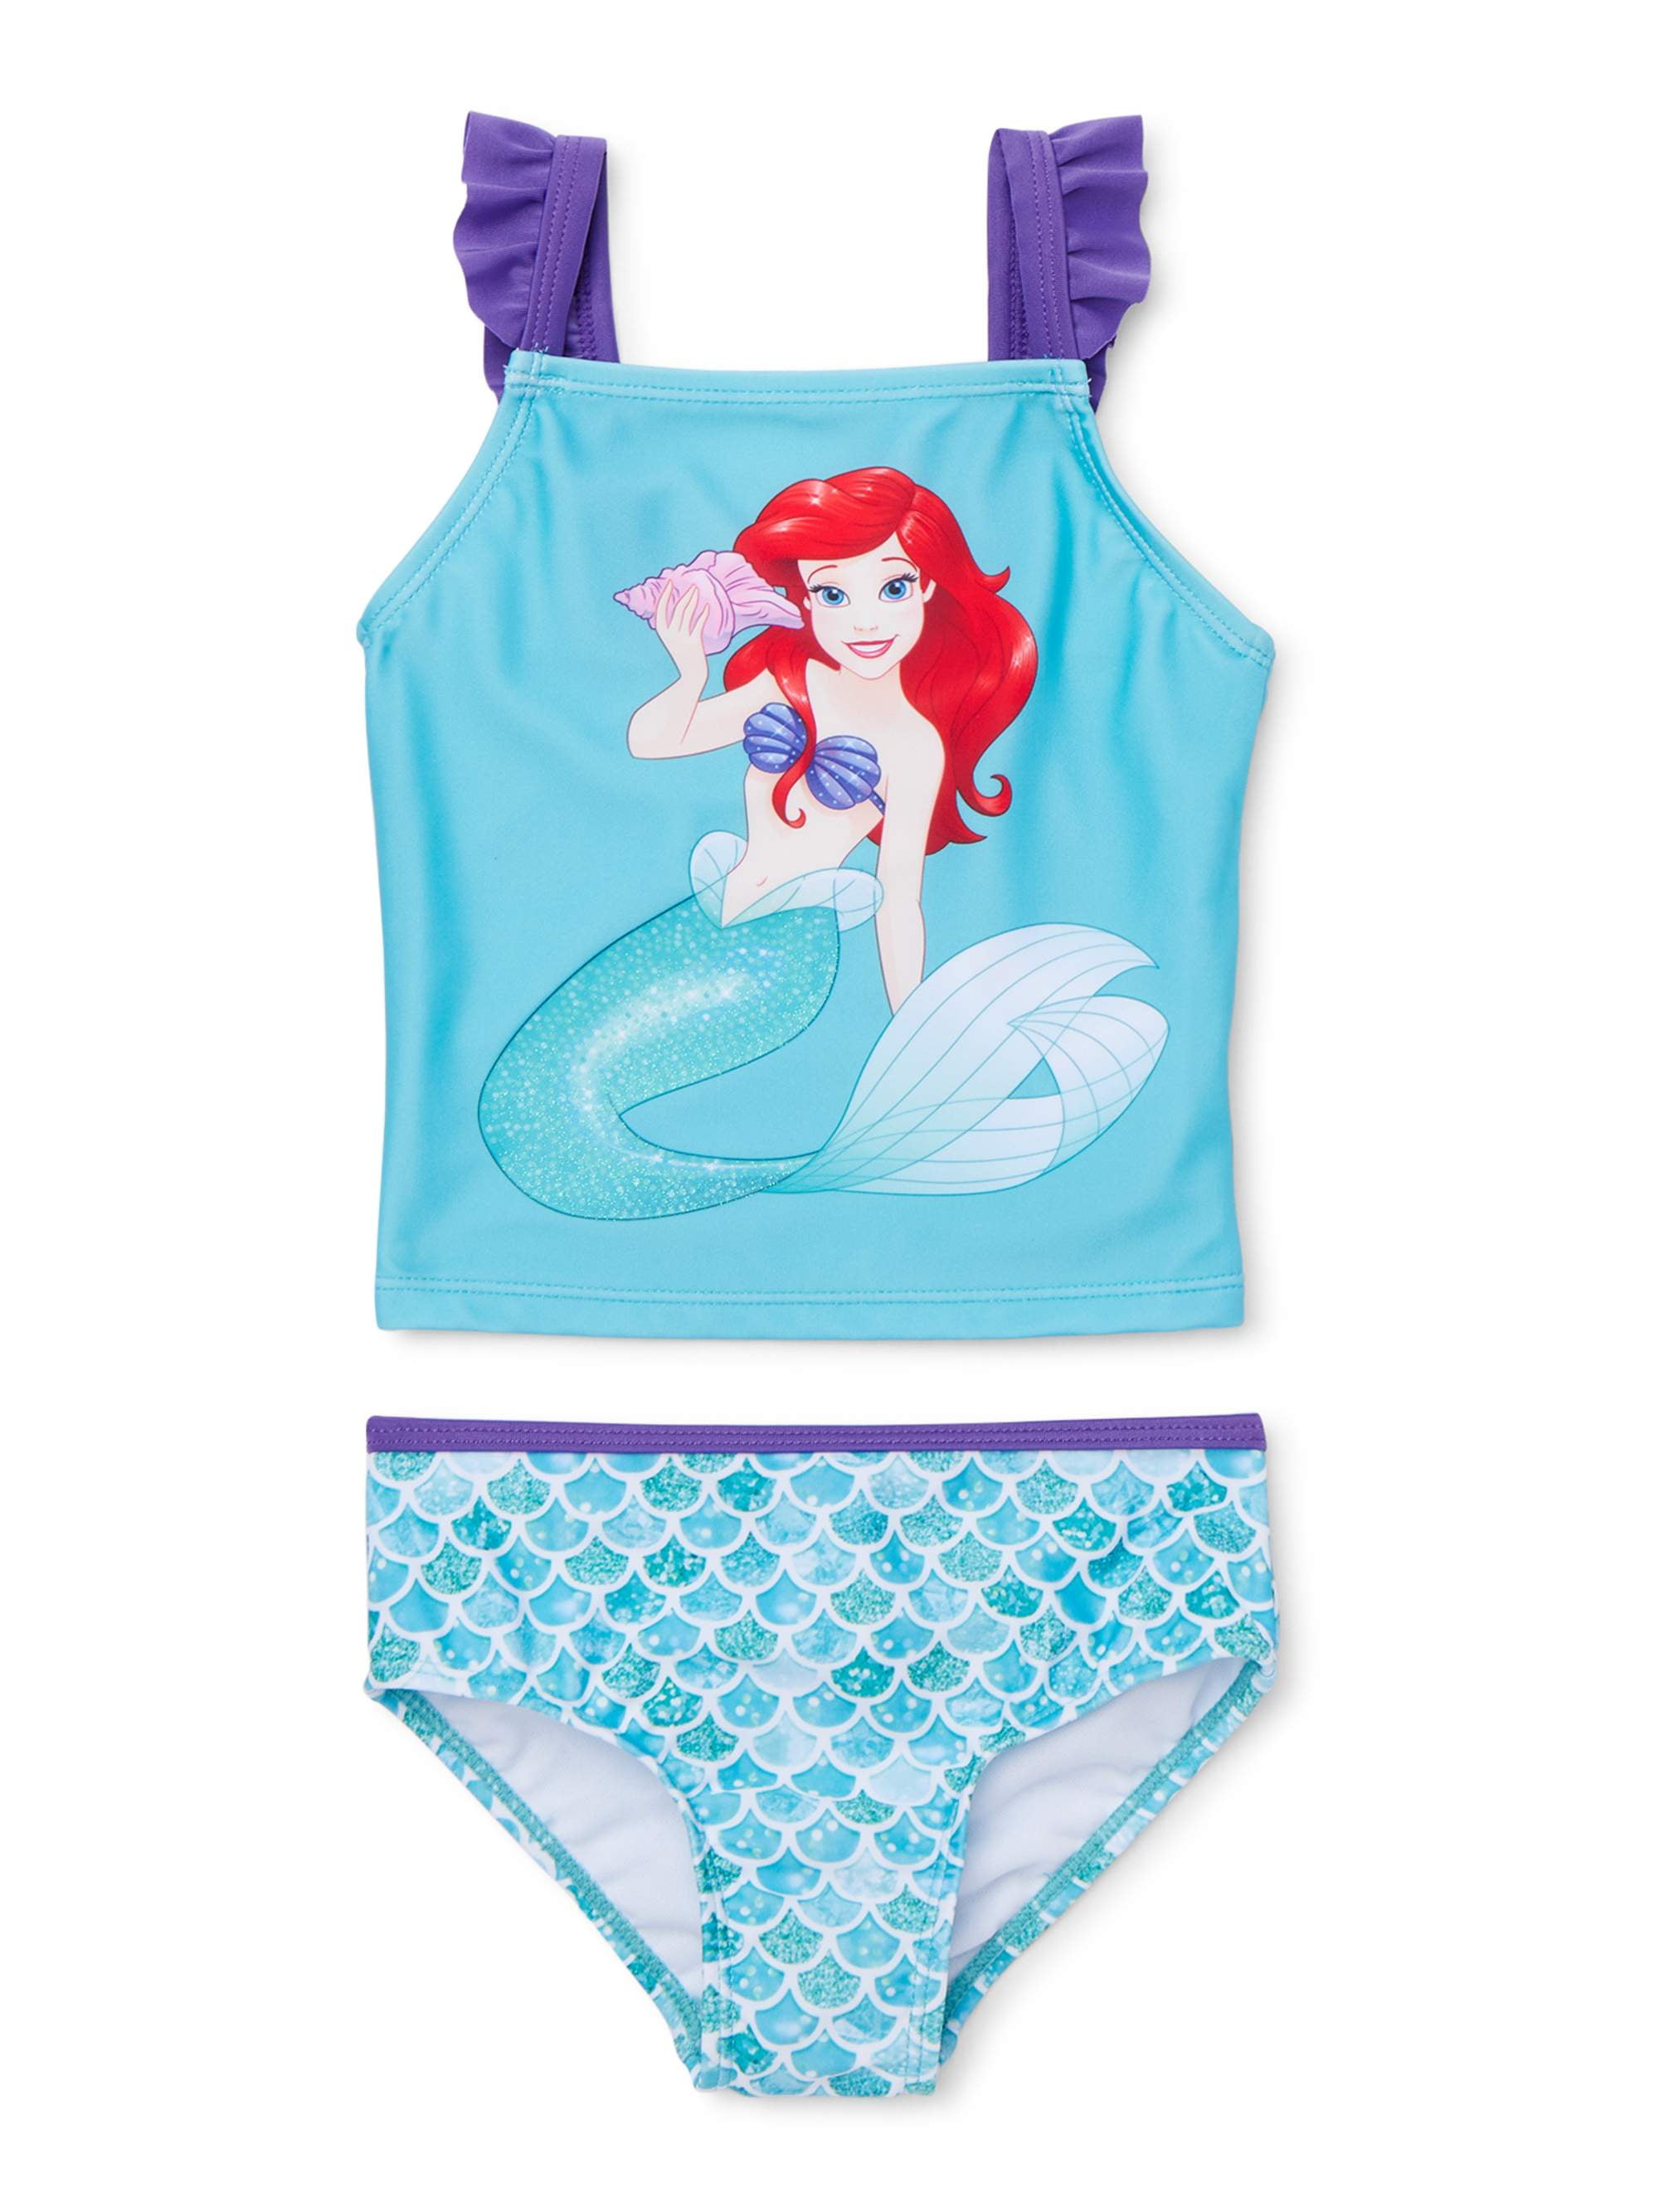 Mermaid Ariel Baby Girls Swimsuit and Cover-Up Sets 18 Months Purple 